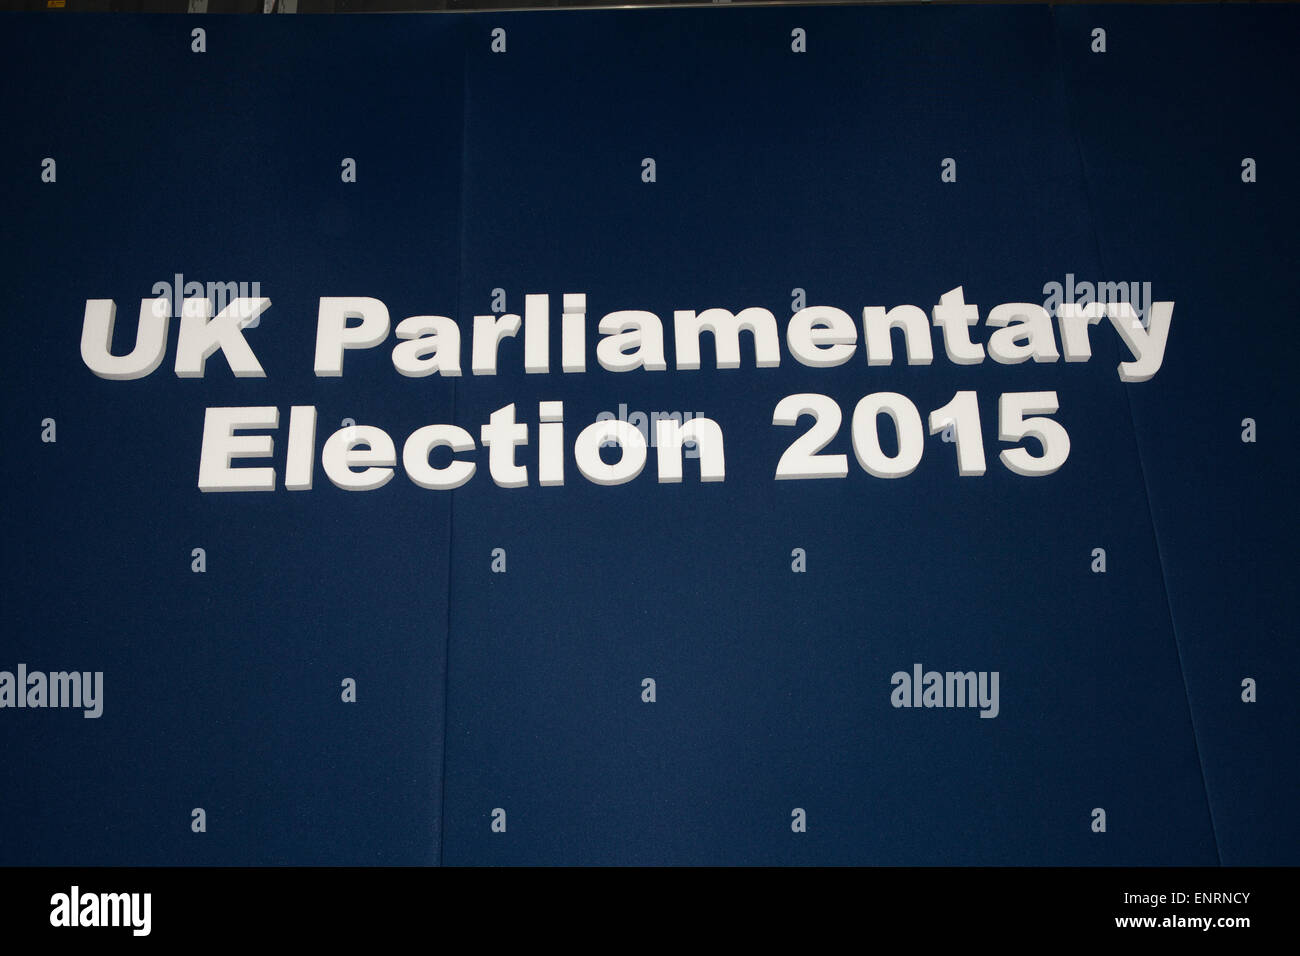 Belfast UK. 7th May 2015 General Election: UK Parliamentary Election 2015 sign Stock Photo